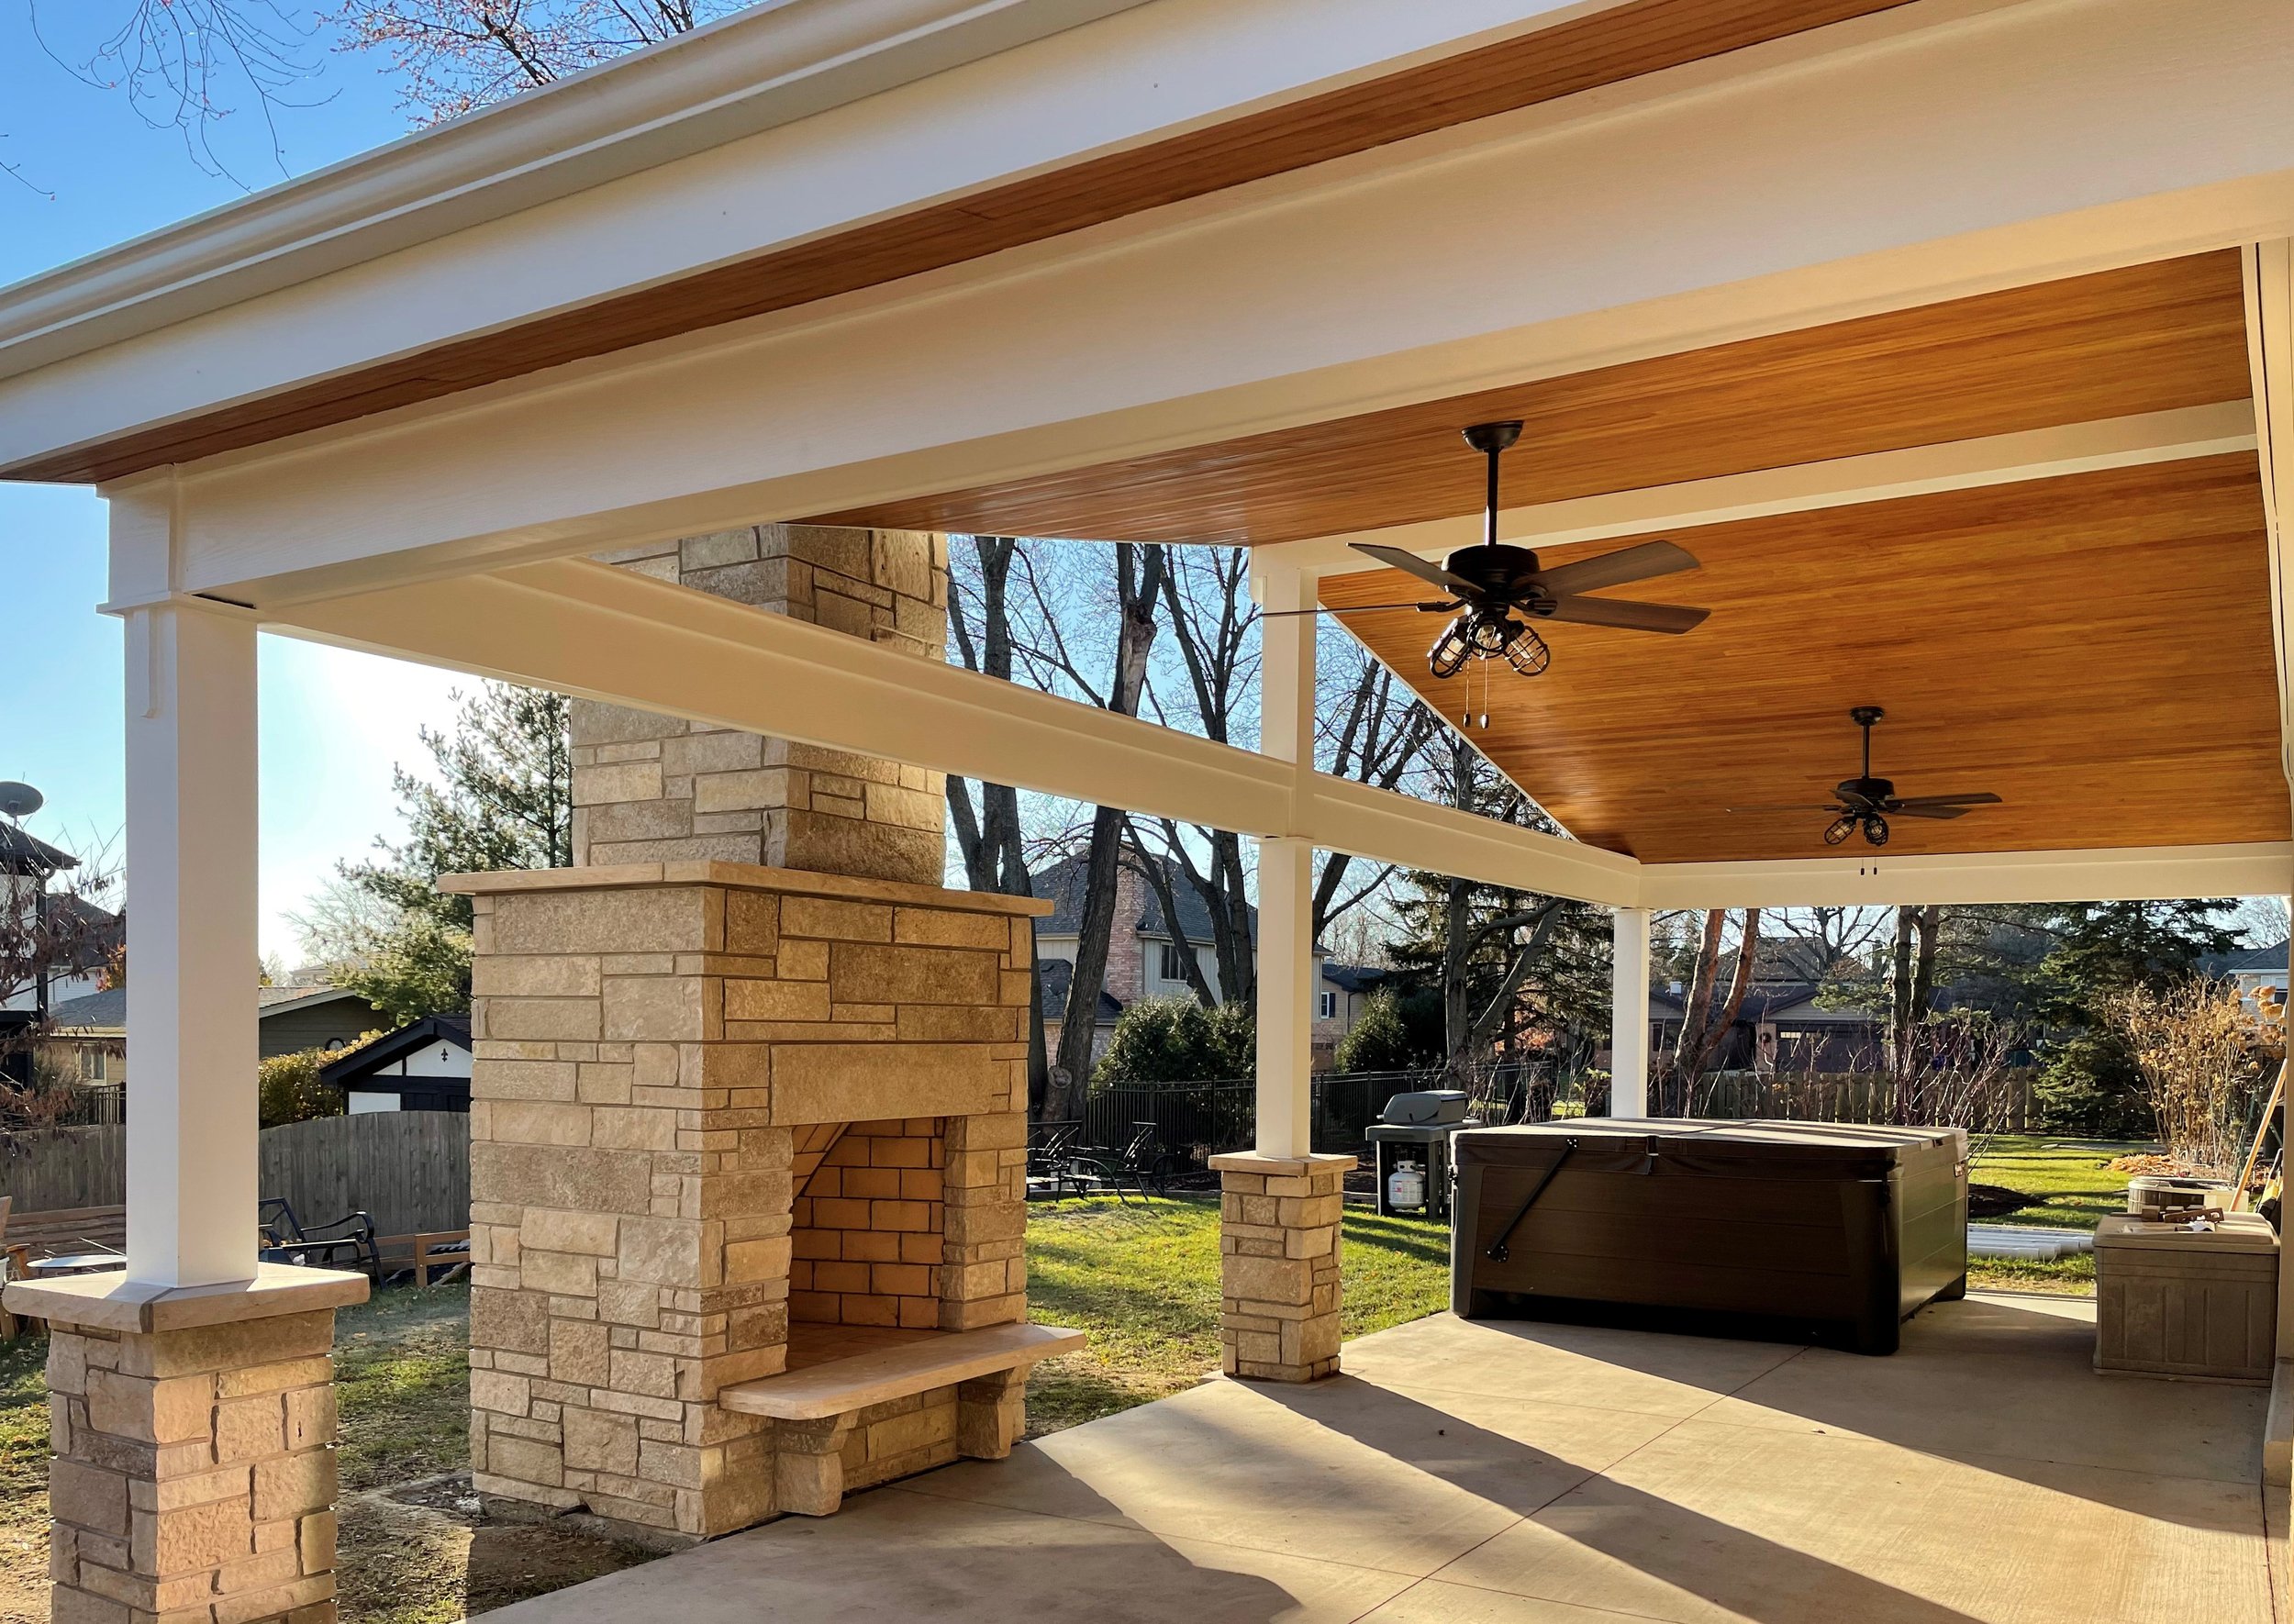 Covered Patio Addition